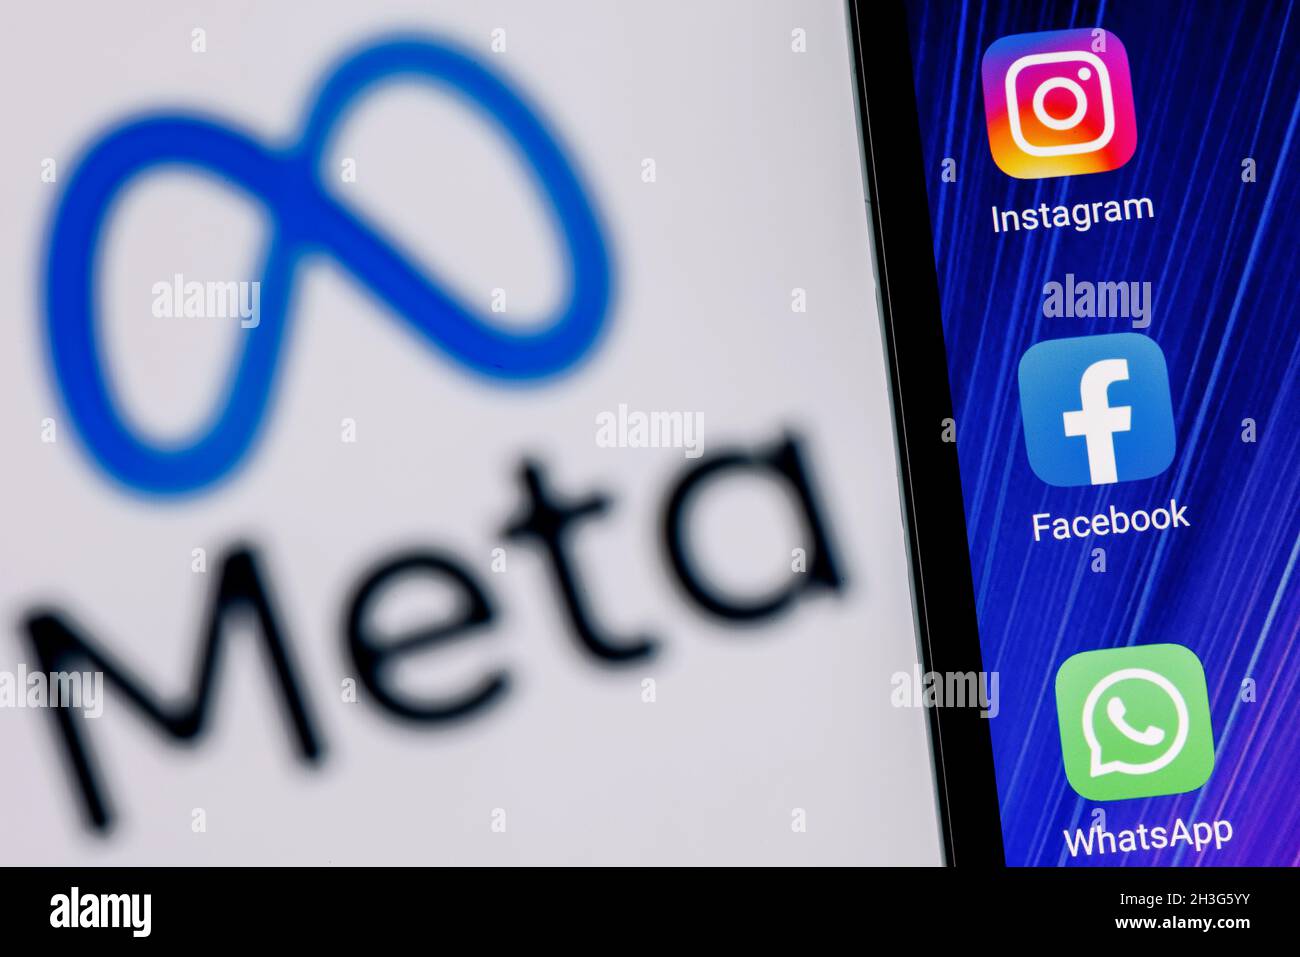 Facebook changes its name to Meta. Smartphone with Facebook, Whatsapp and Instagram app icon on the background of Meta logo. Stock Photo